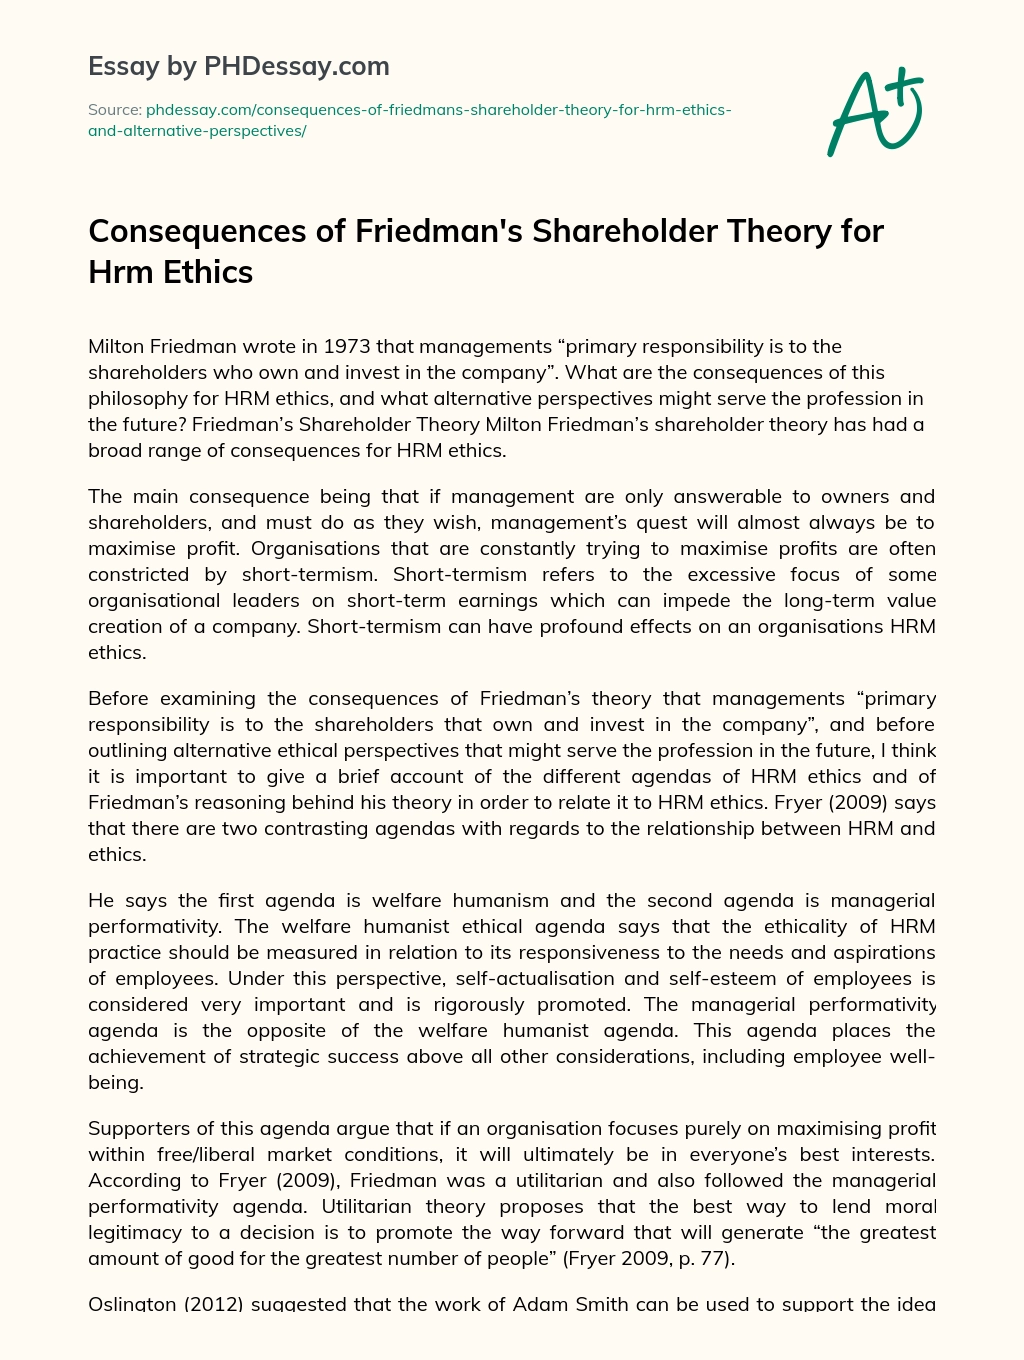 Consequences of Friedman’s Shareholder Theory for Hrm Ethics essay